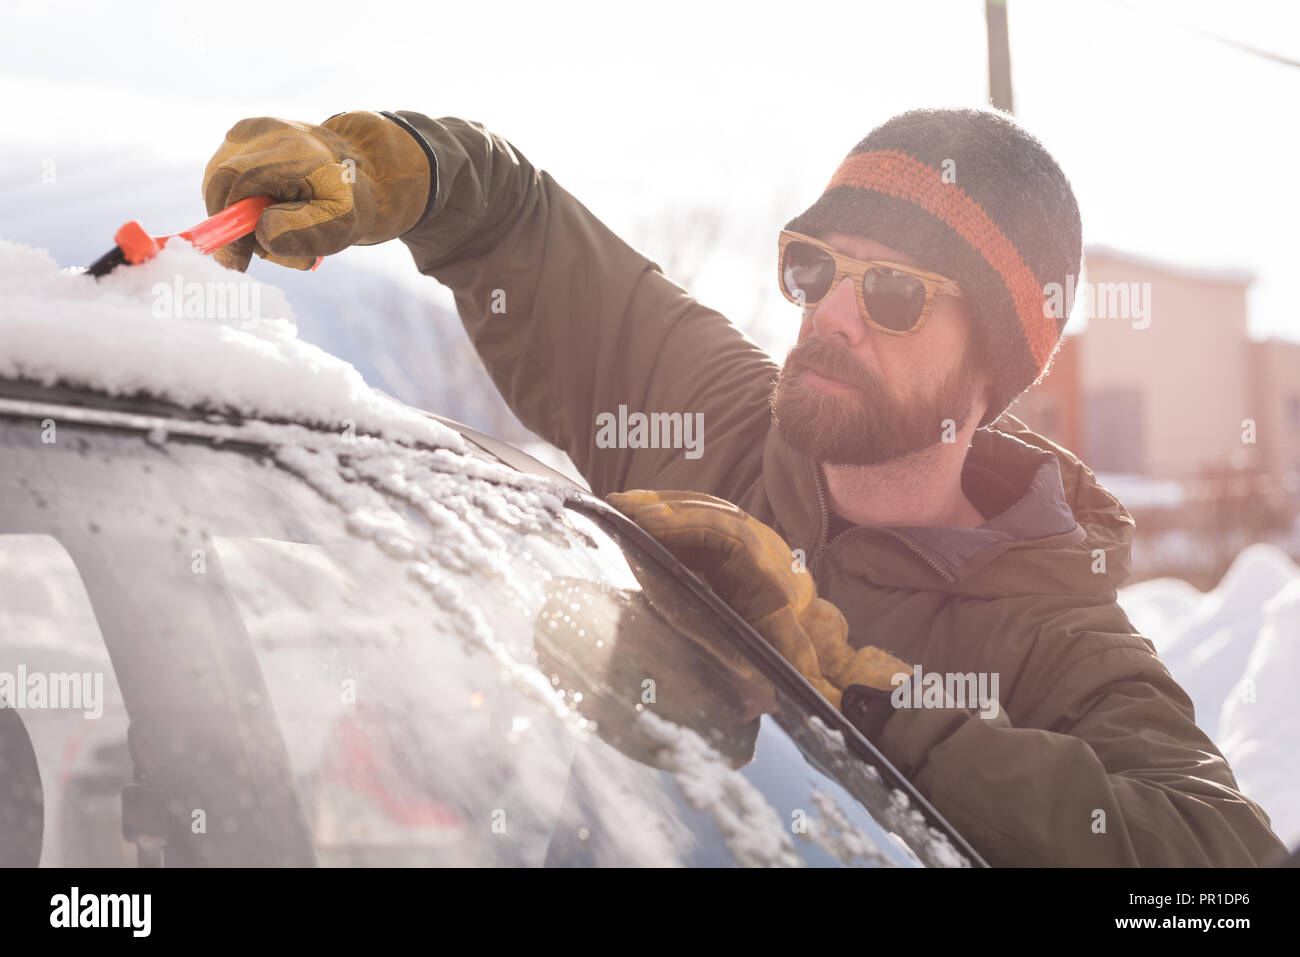 Man cleaning snow from car windshield Stock Photo